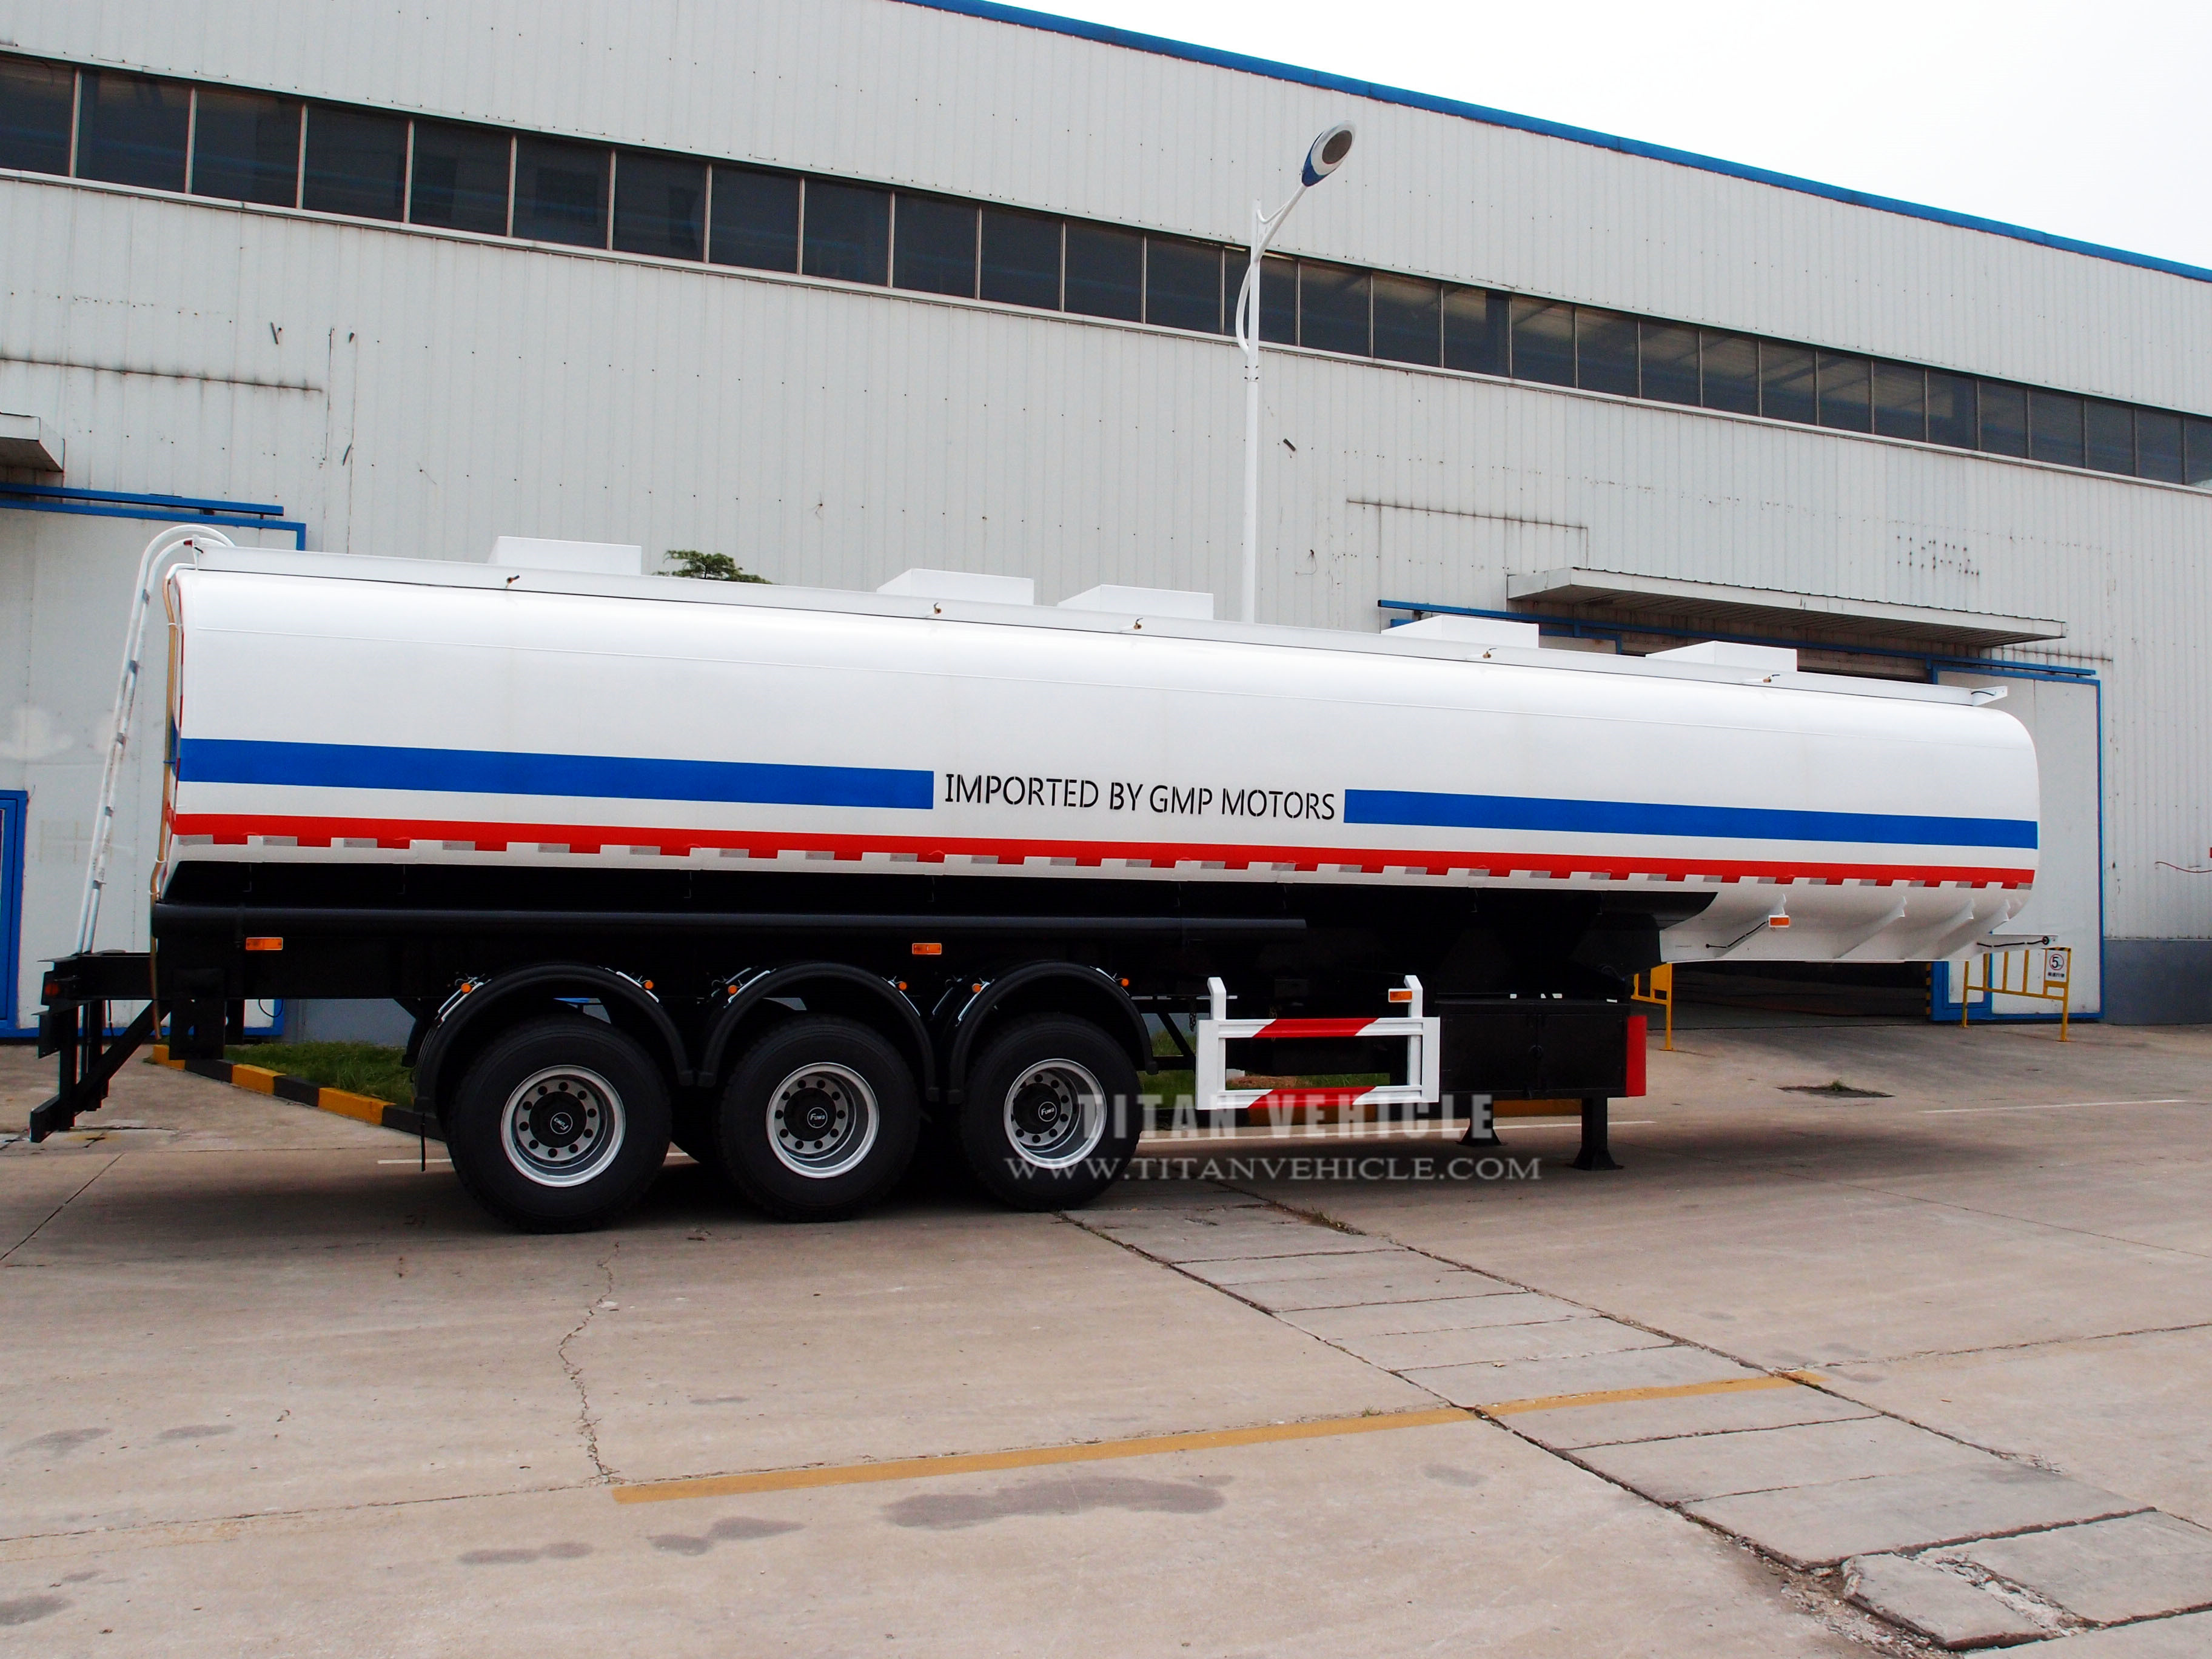 The oil tankers made by Titan are used in domestic and foreign brands, such as: JOST C200 for landing gear.